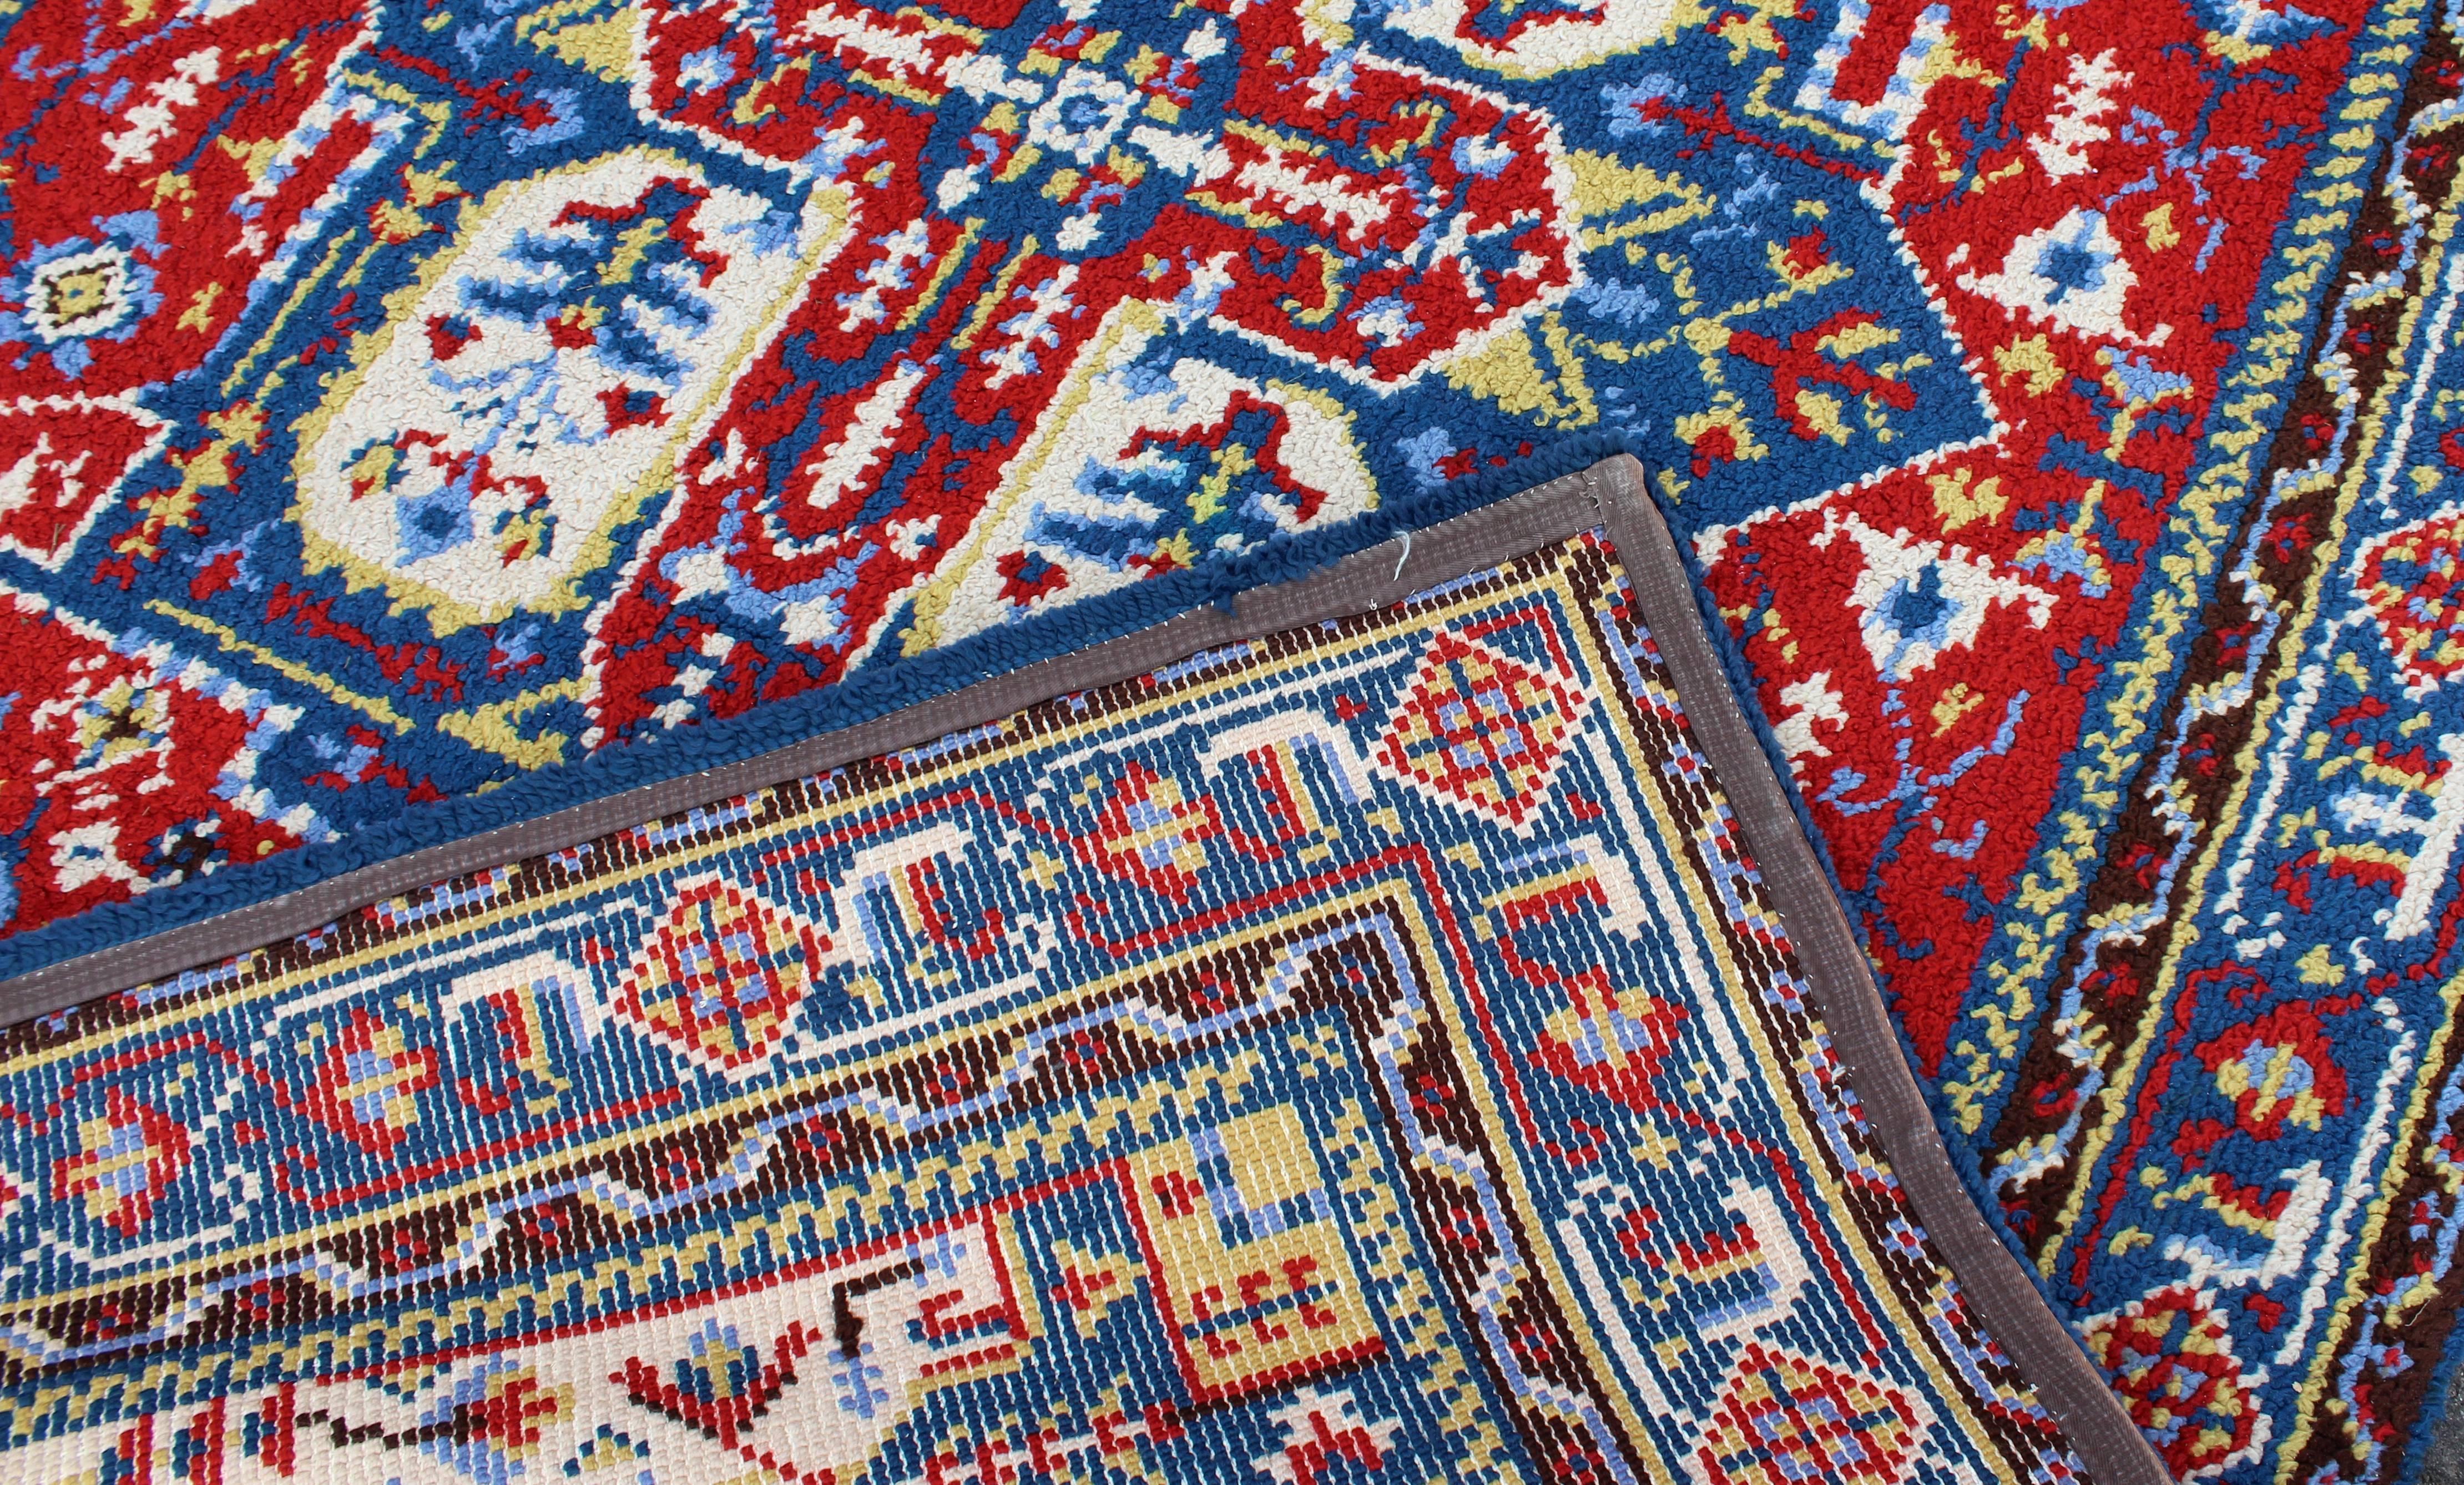 Mid-20th Century Mid-Century Modern Hand-Knotted Area Rug Carpet Swedish Style Blue Red